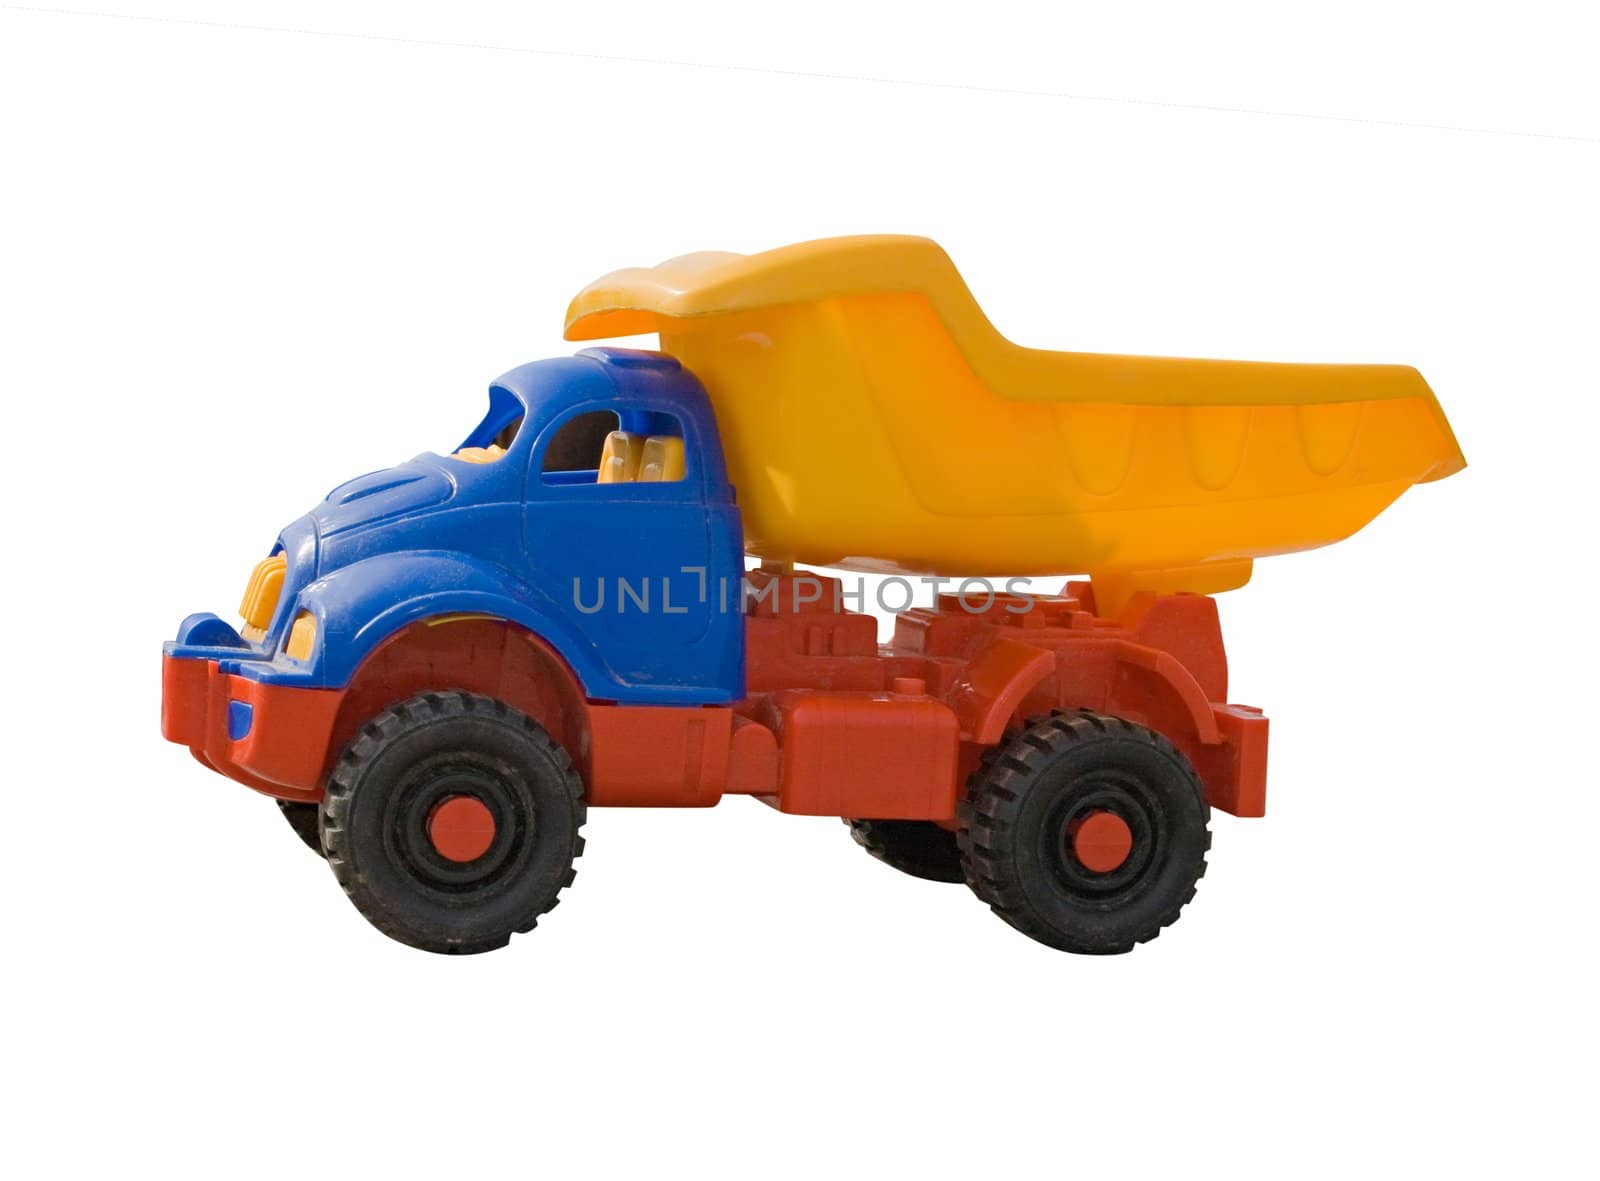 A toy truck, shot from floor level